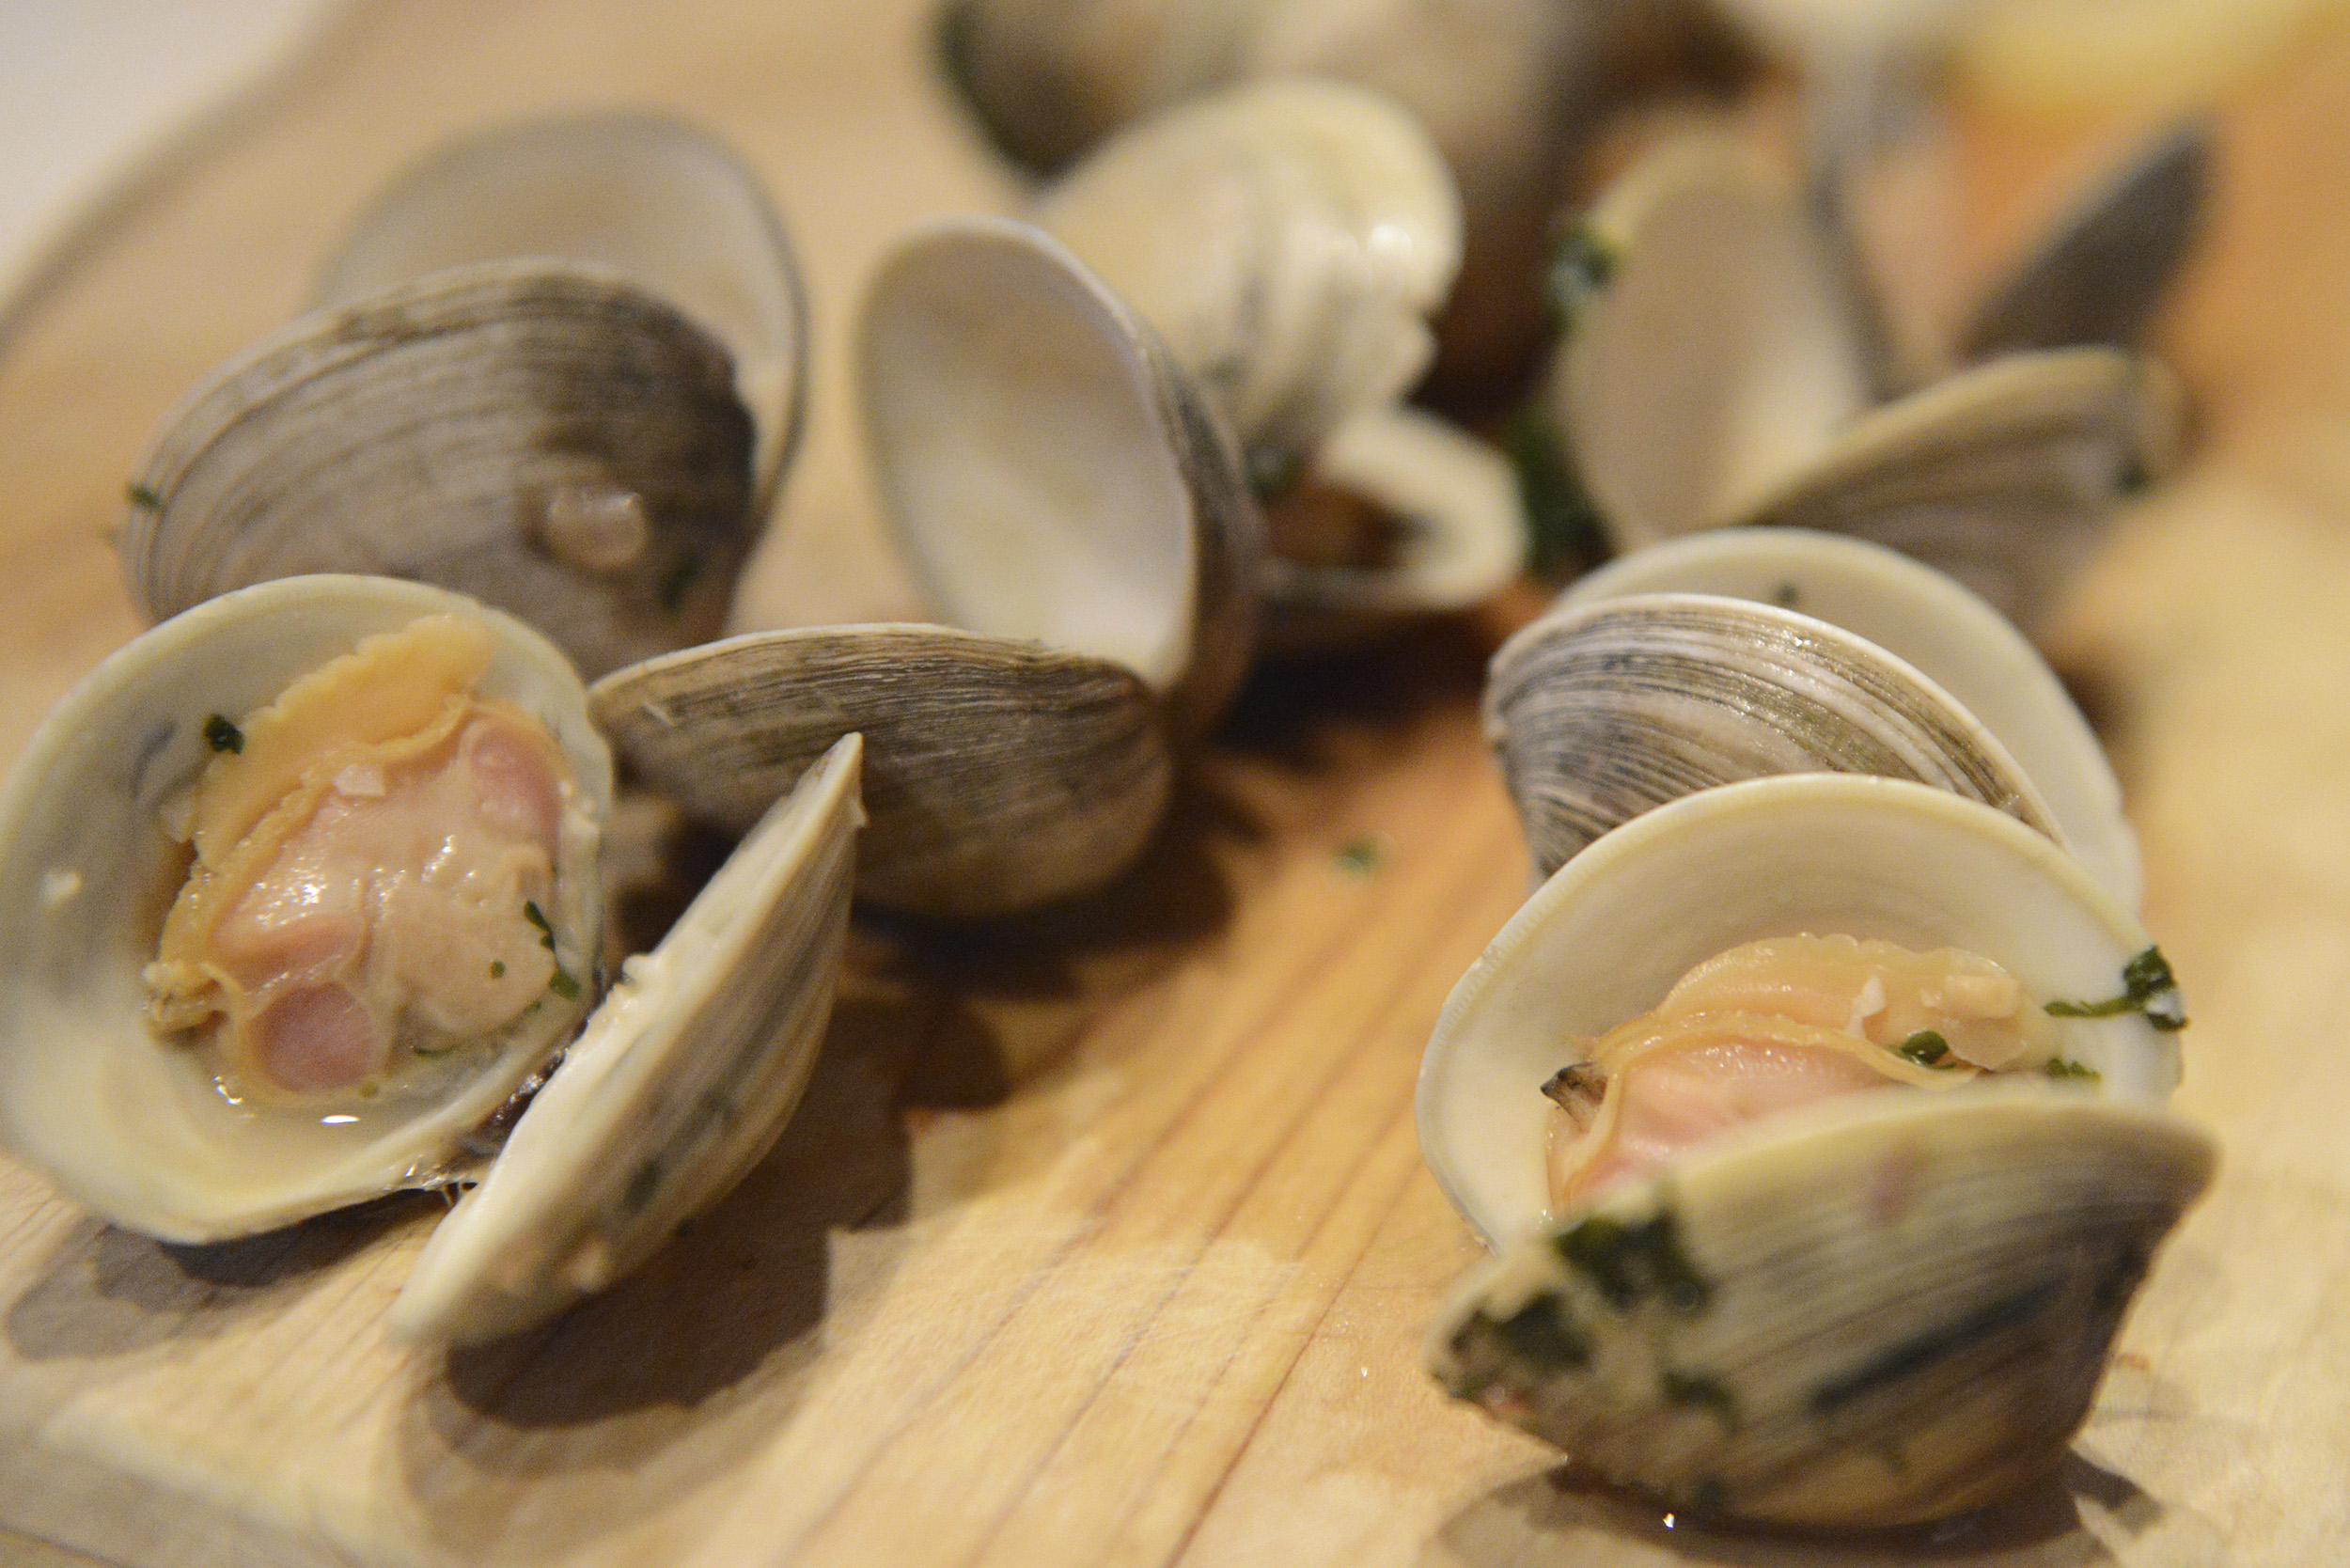 Clams as a source of B12